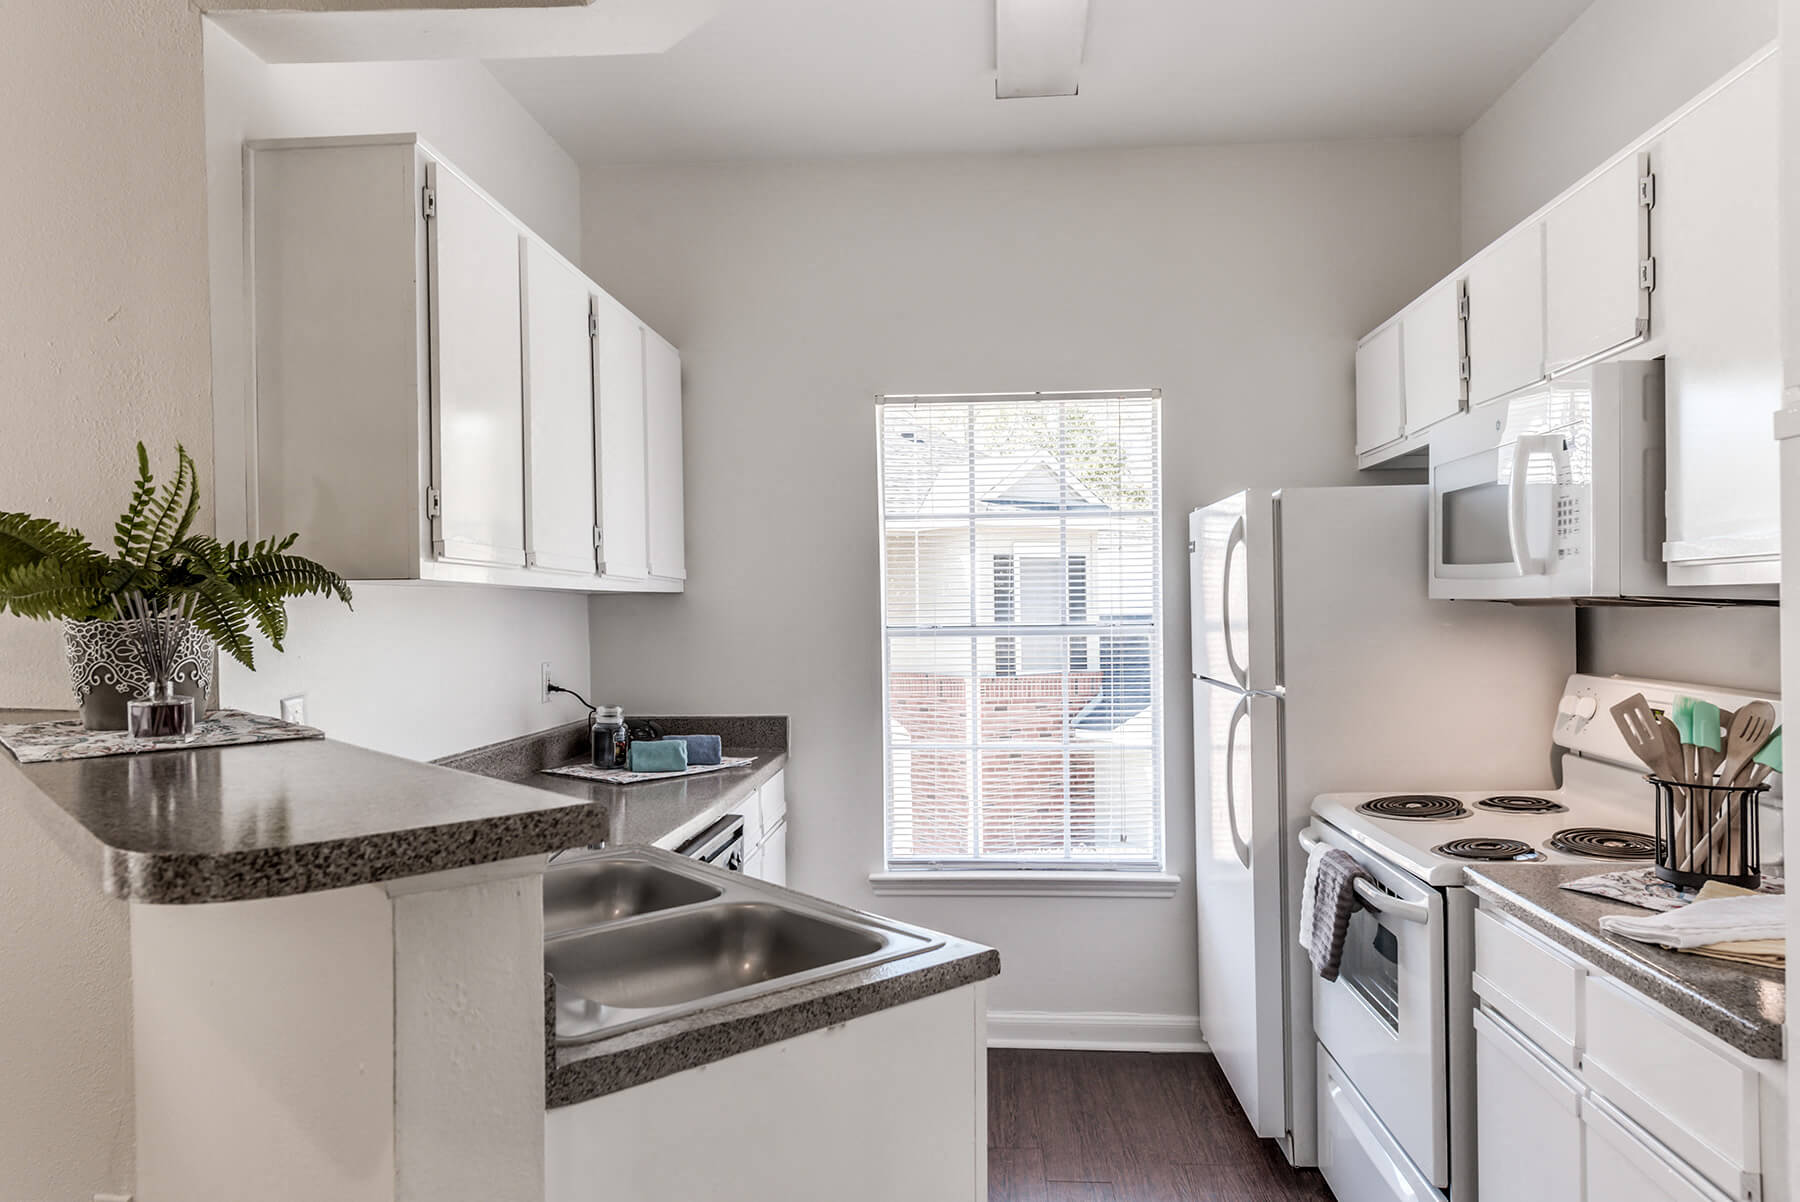 A bright kitchen with white appliances at the Hollow Creek apartments in Conroe, Texas.